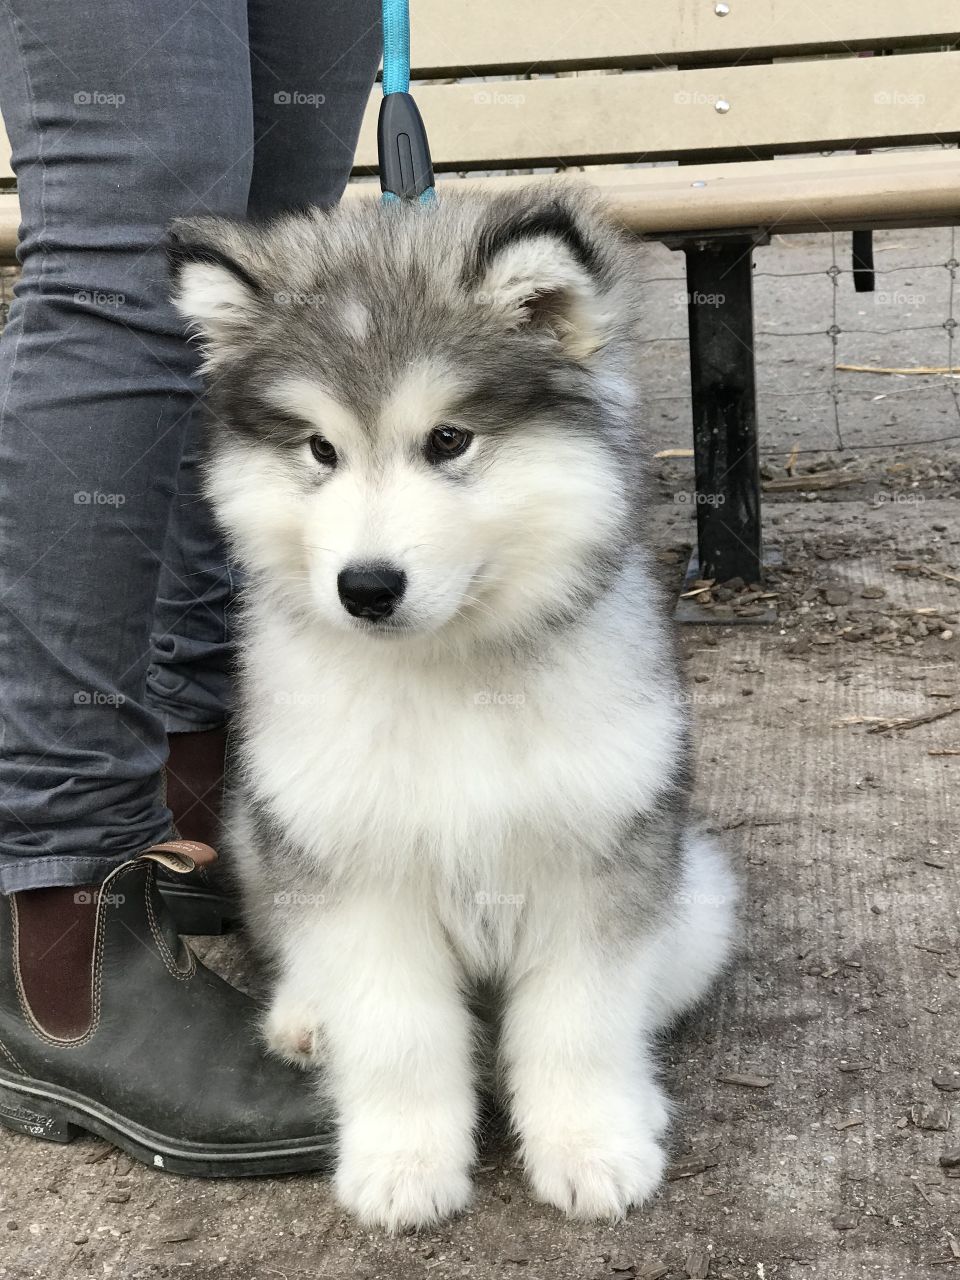 Can we talk about how cute this malamute is!? I saw him at the dog park and thought he was so cute. 